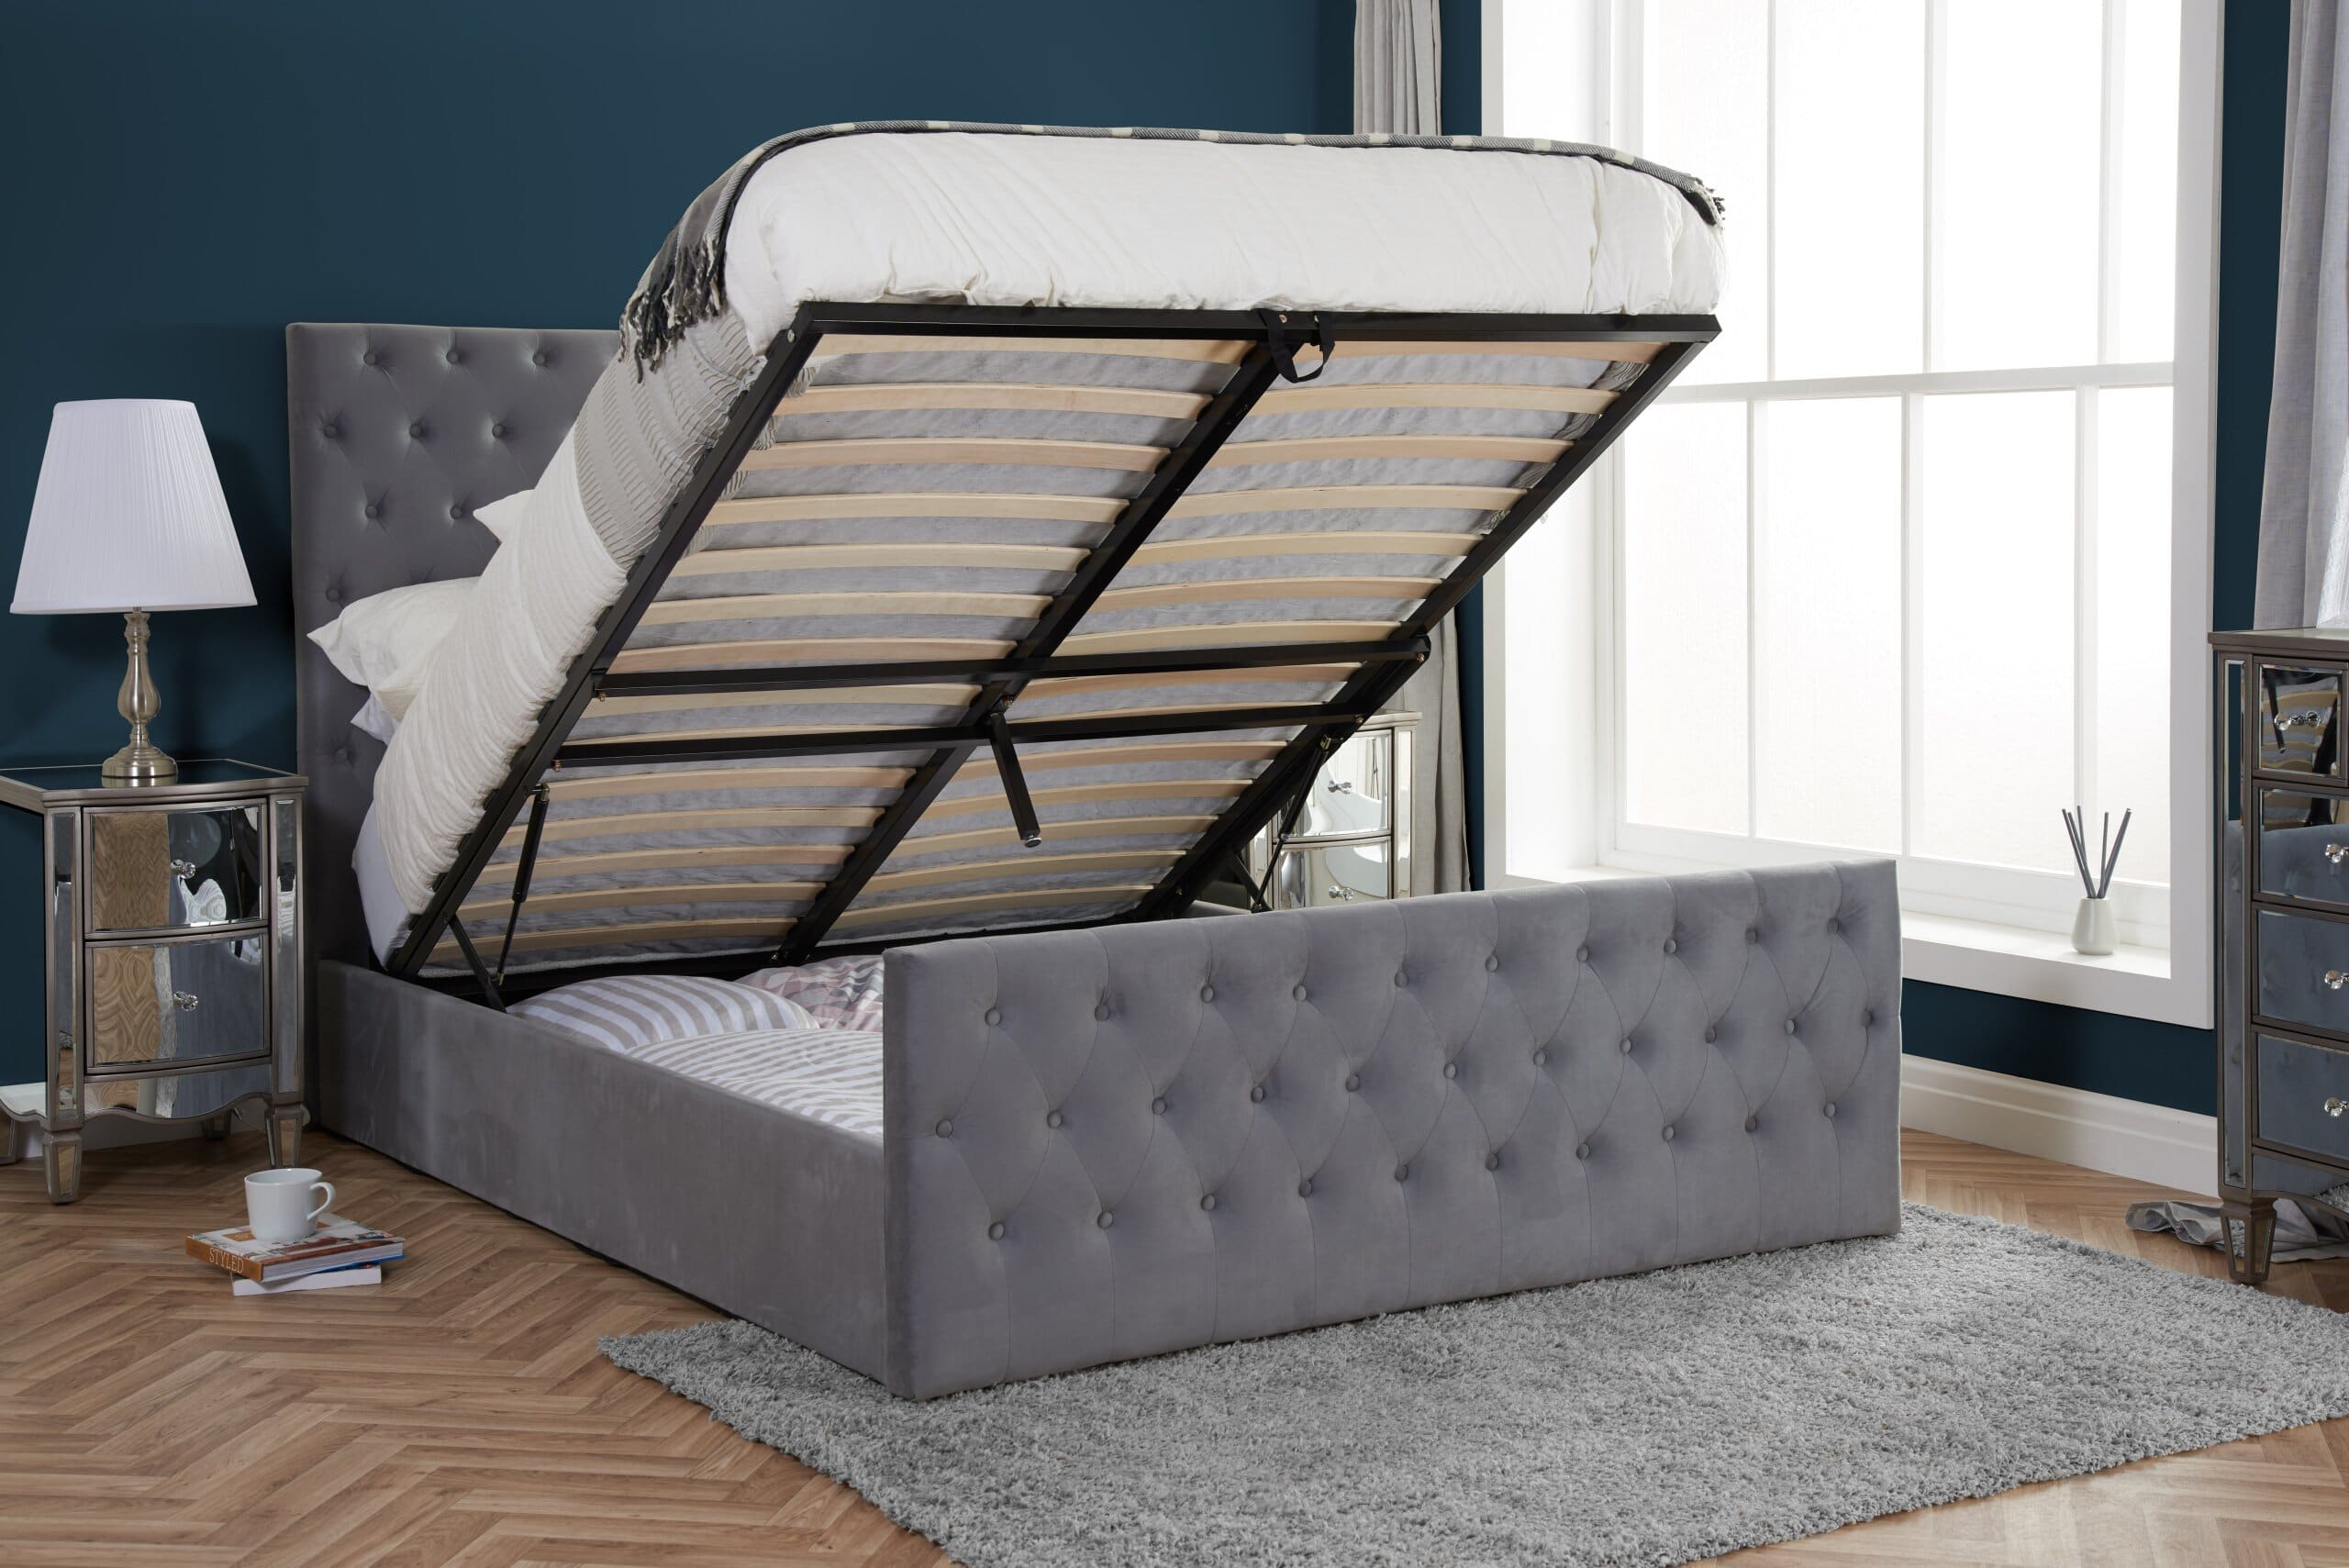 An image of an open end opening ottoman bed.